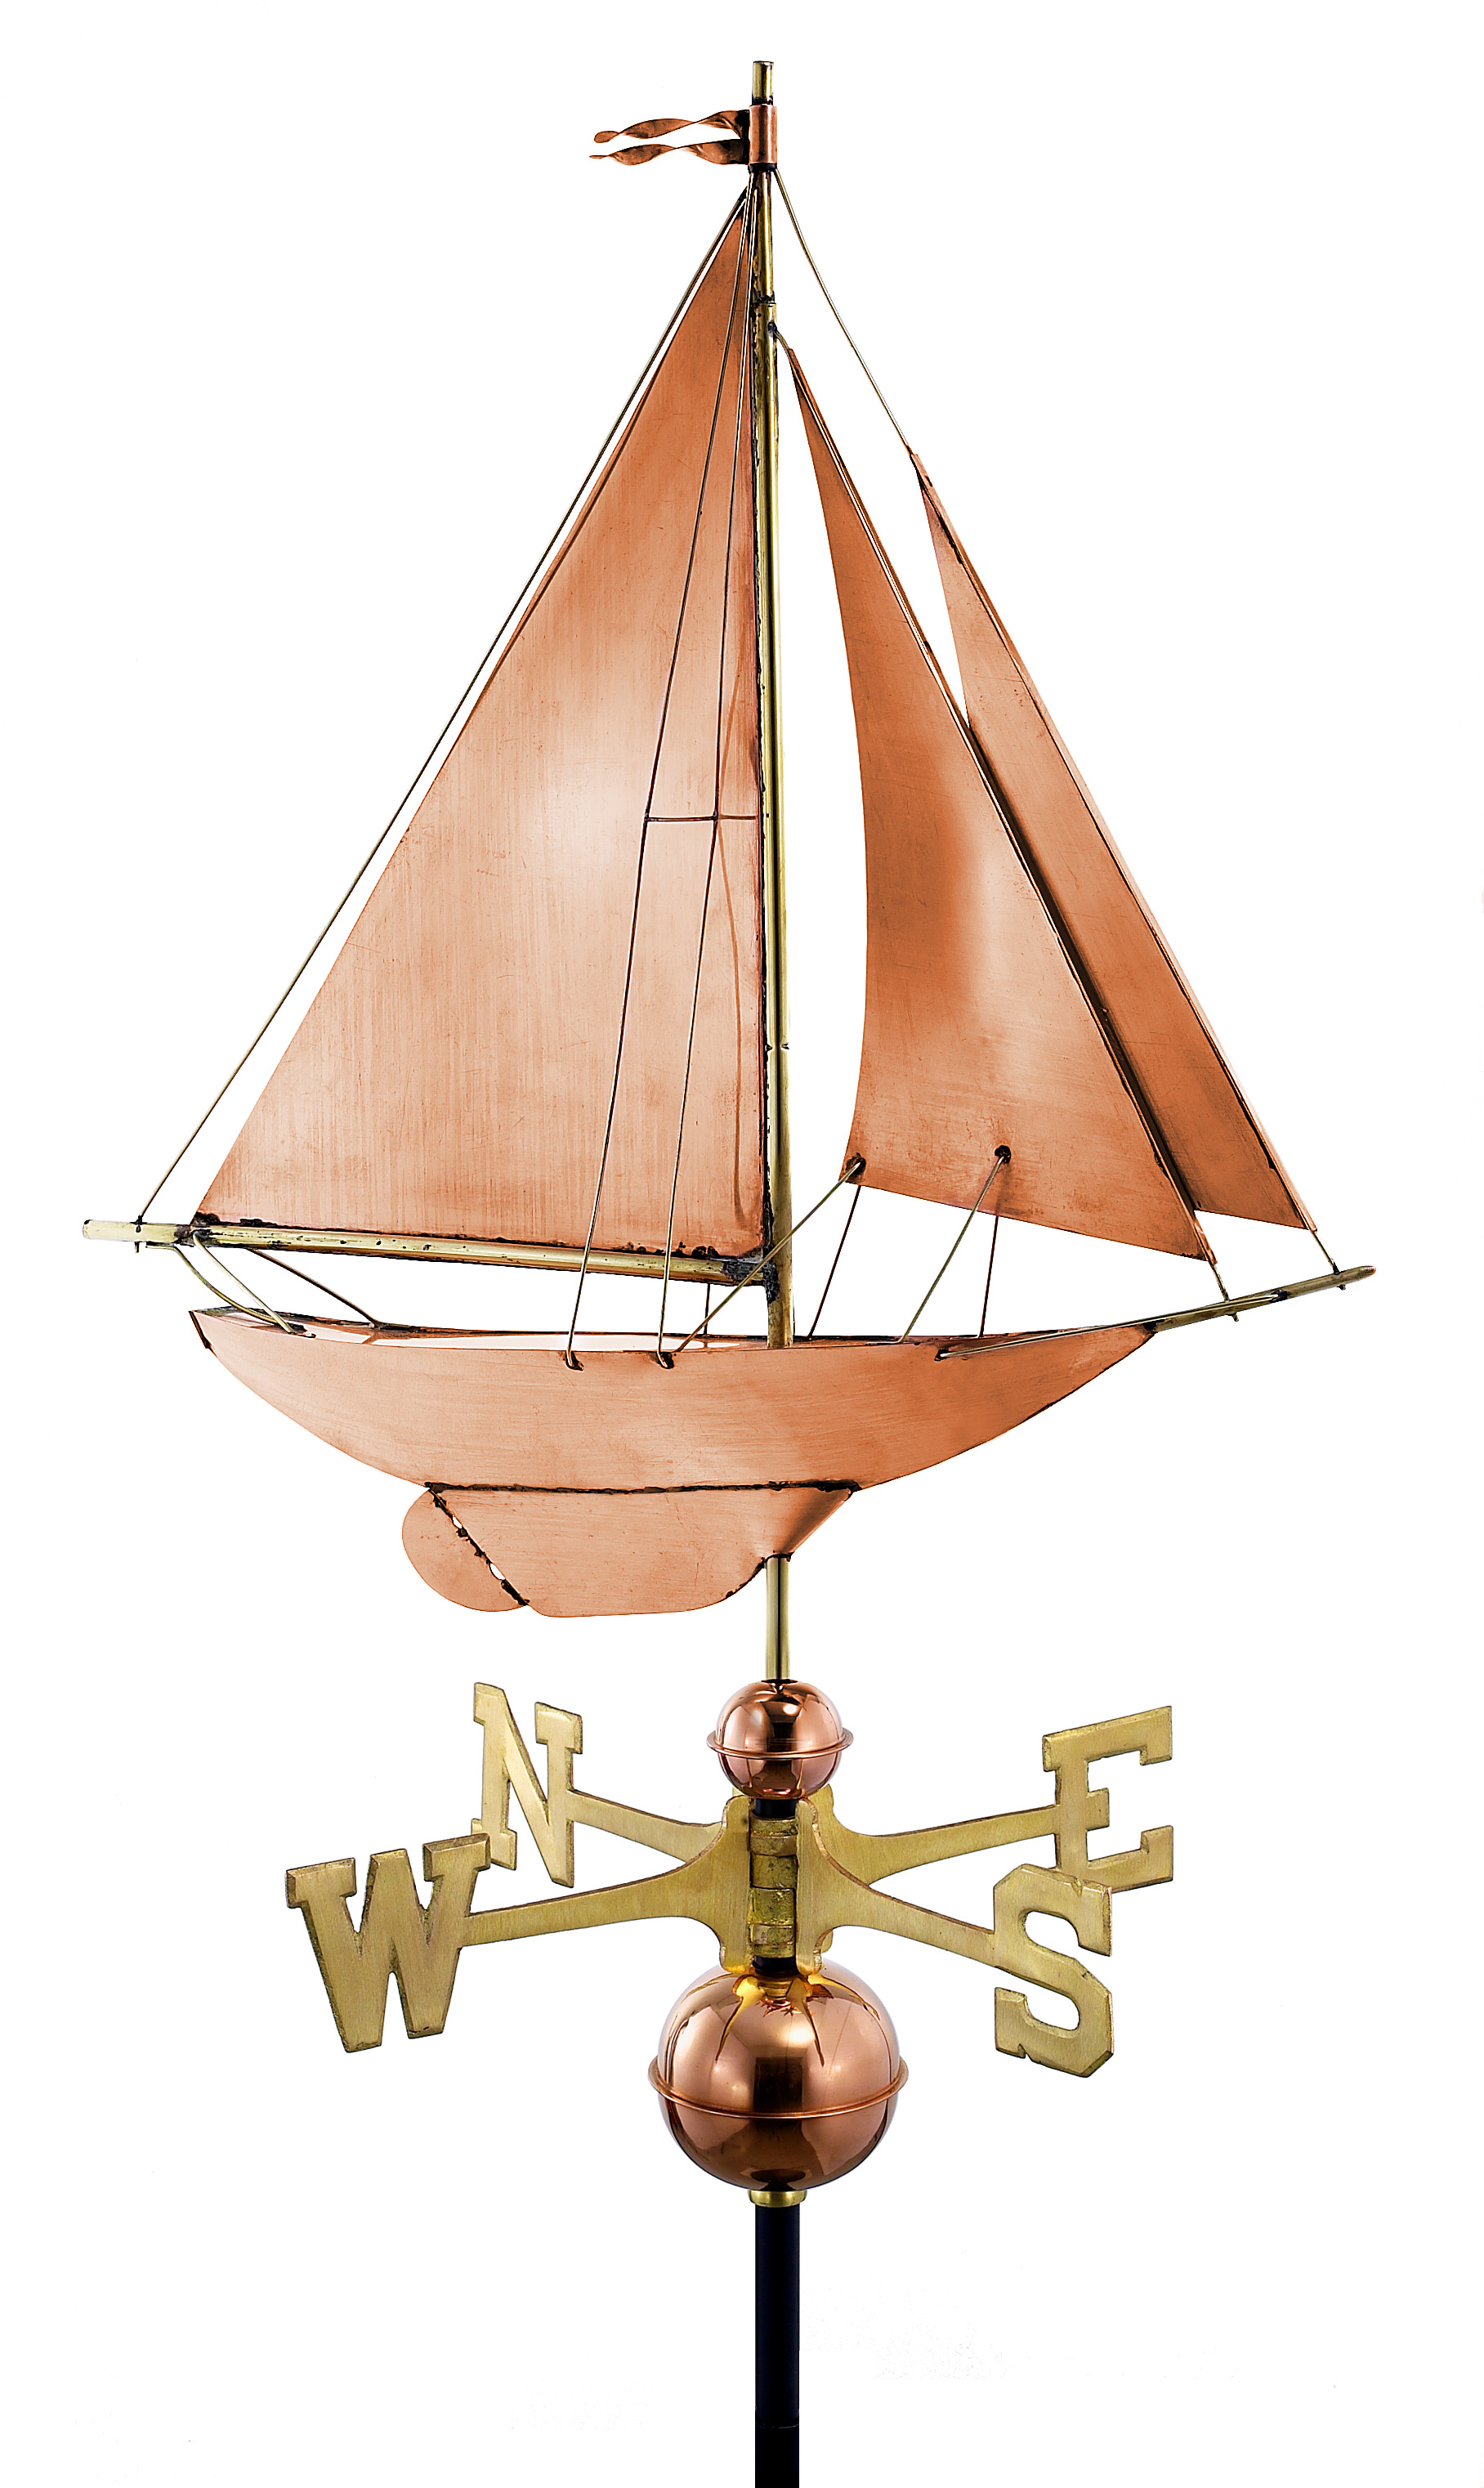 weather vane for sailboat